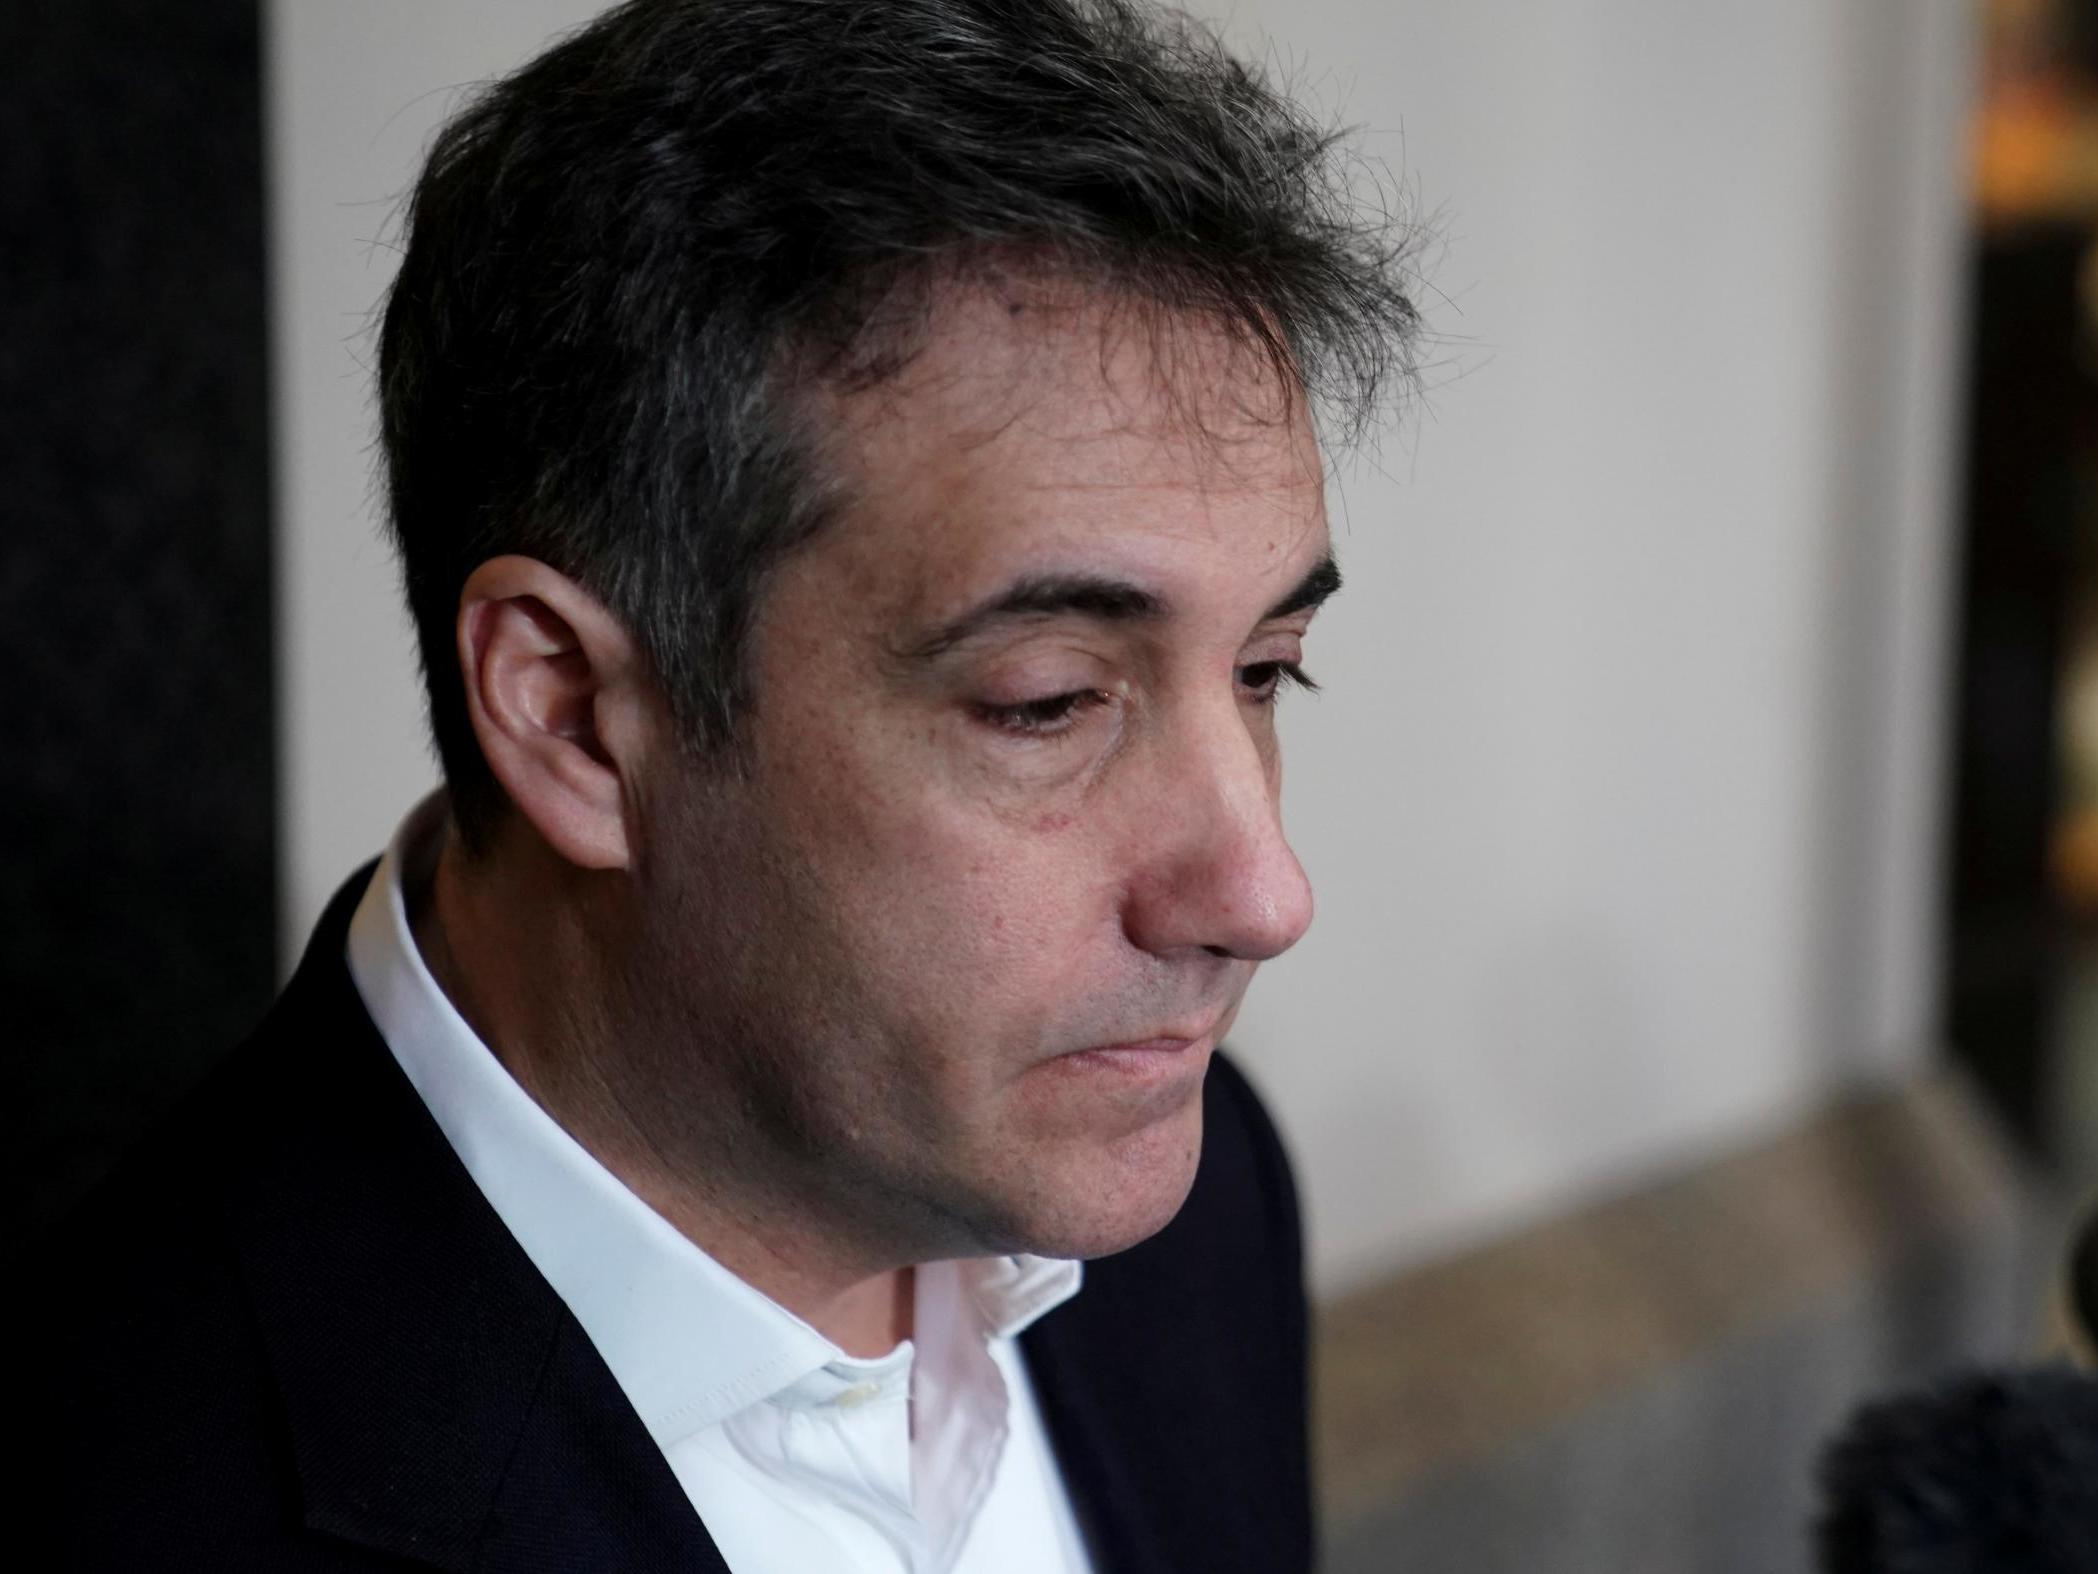 Trump's former attorney Michael Cohen has early prison release over coronavirus fears rescinded